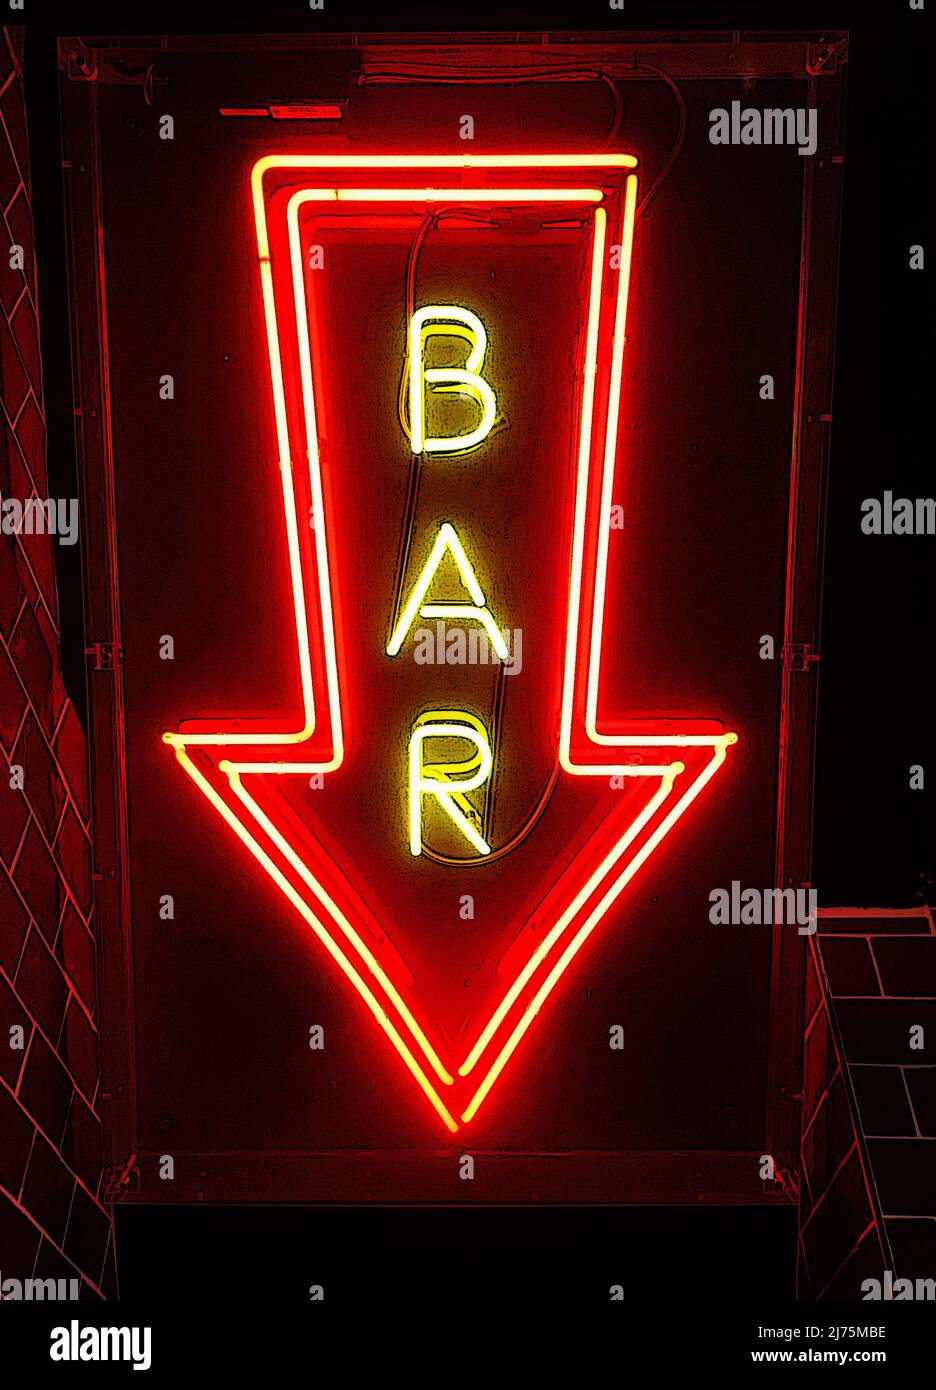 Digital art of a illuminated neon bar sign, set in an arrow, pointing down. Suit magazine, editorial, book, concept art for pubs/hospitality industry. Stock Photo